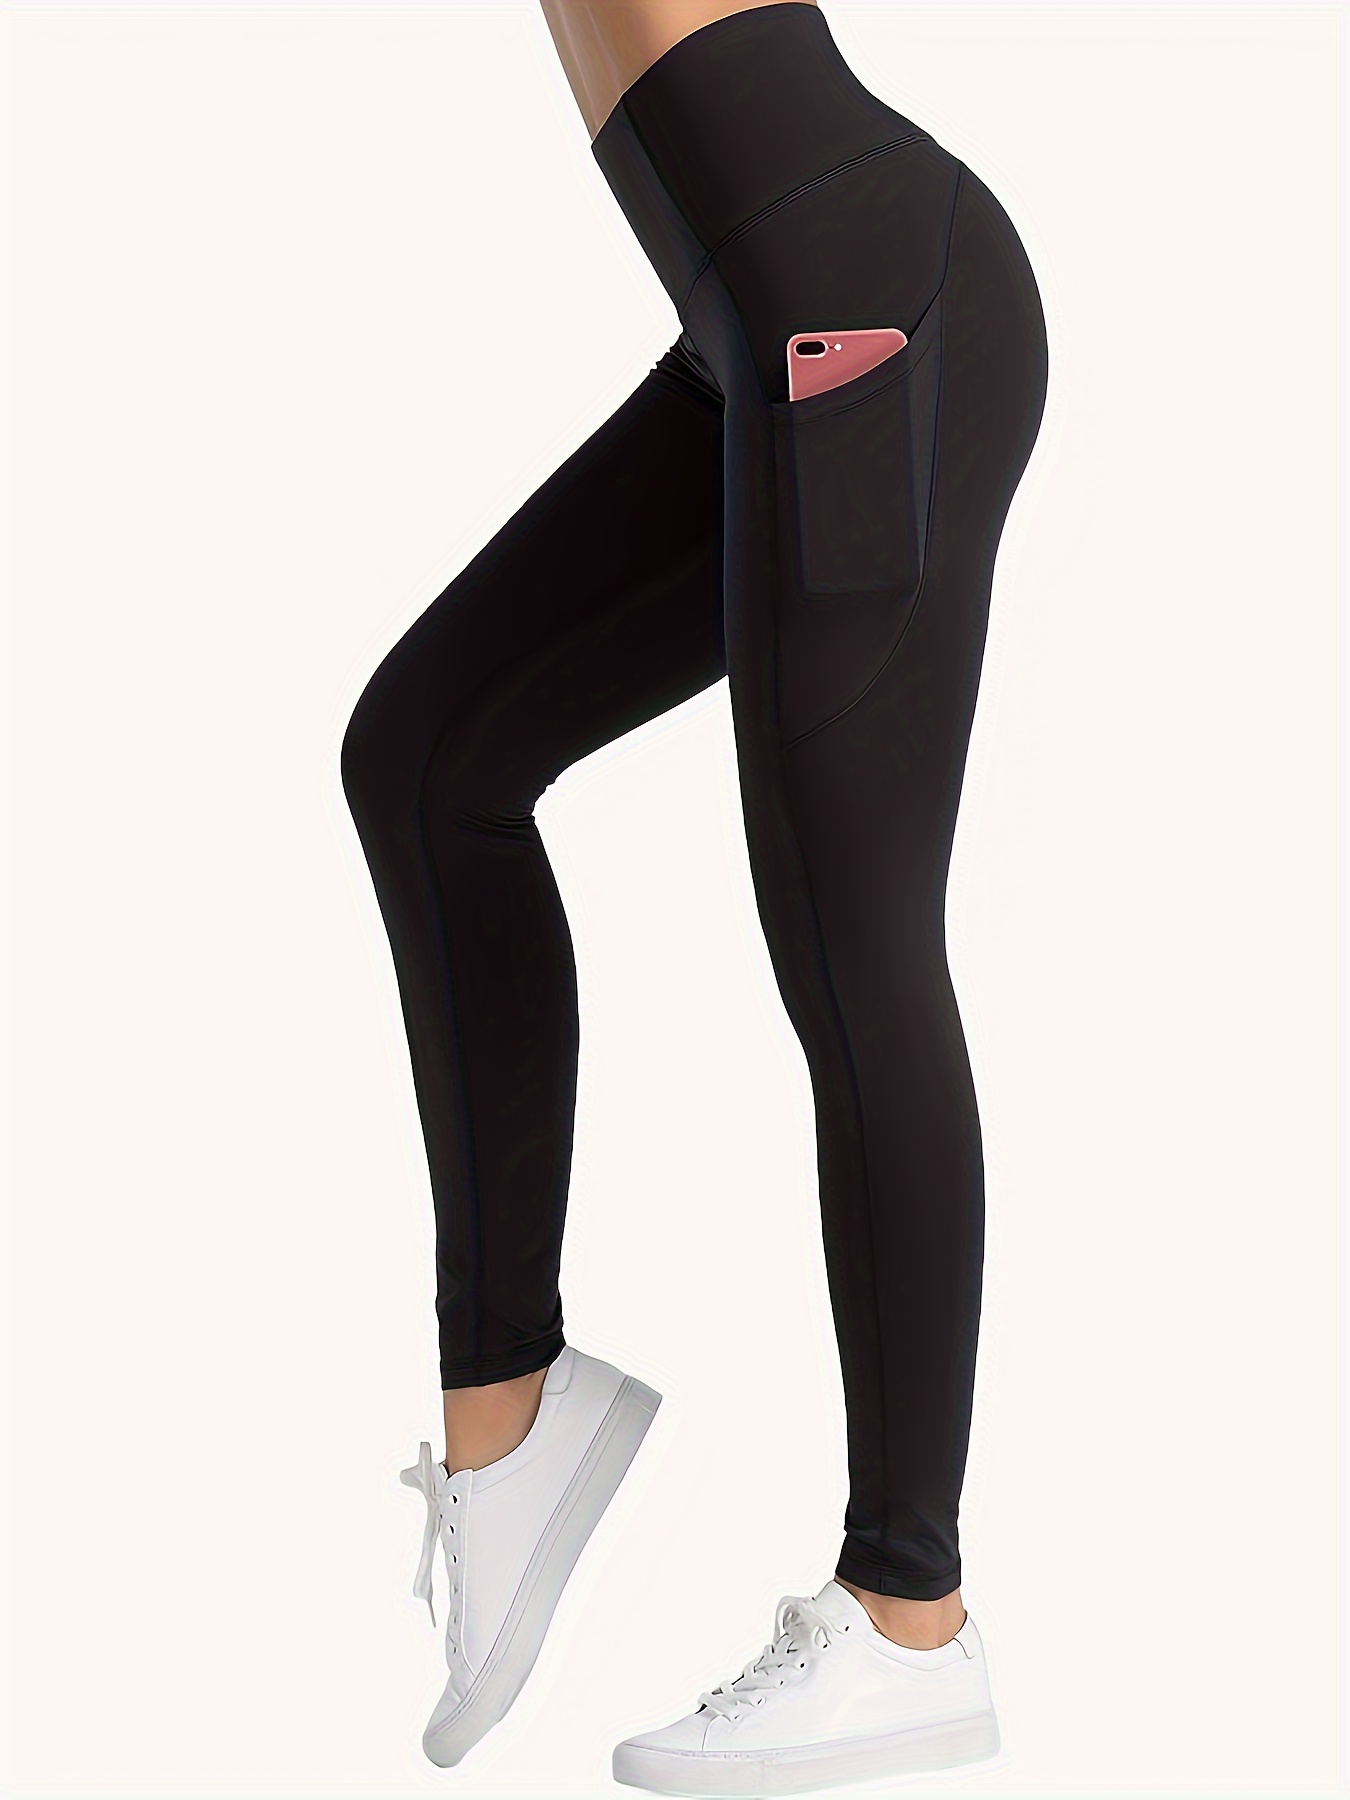 Black Solid Color High Waist Tights Long Pants With Pockets, Quick Dry  Sports Fitness Yoga Running Leggings